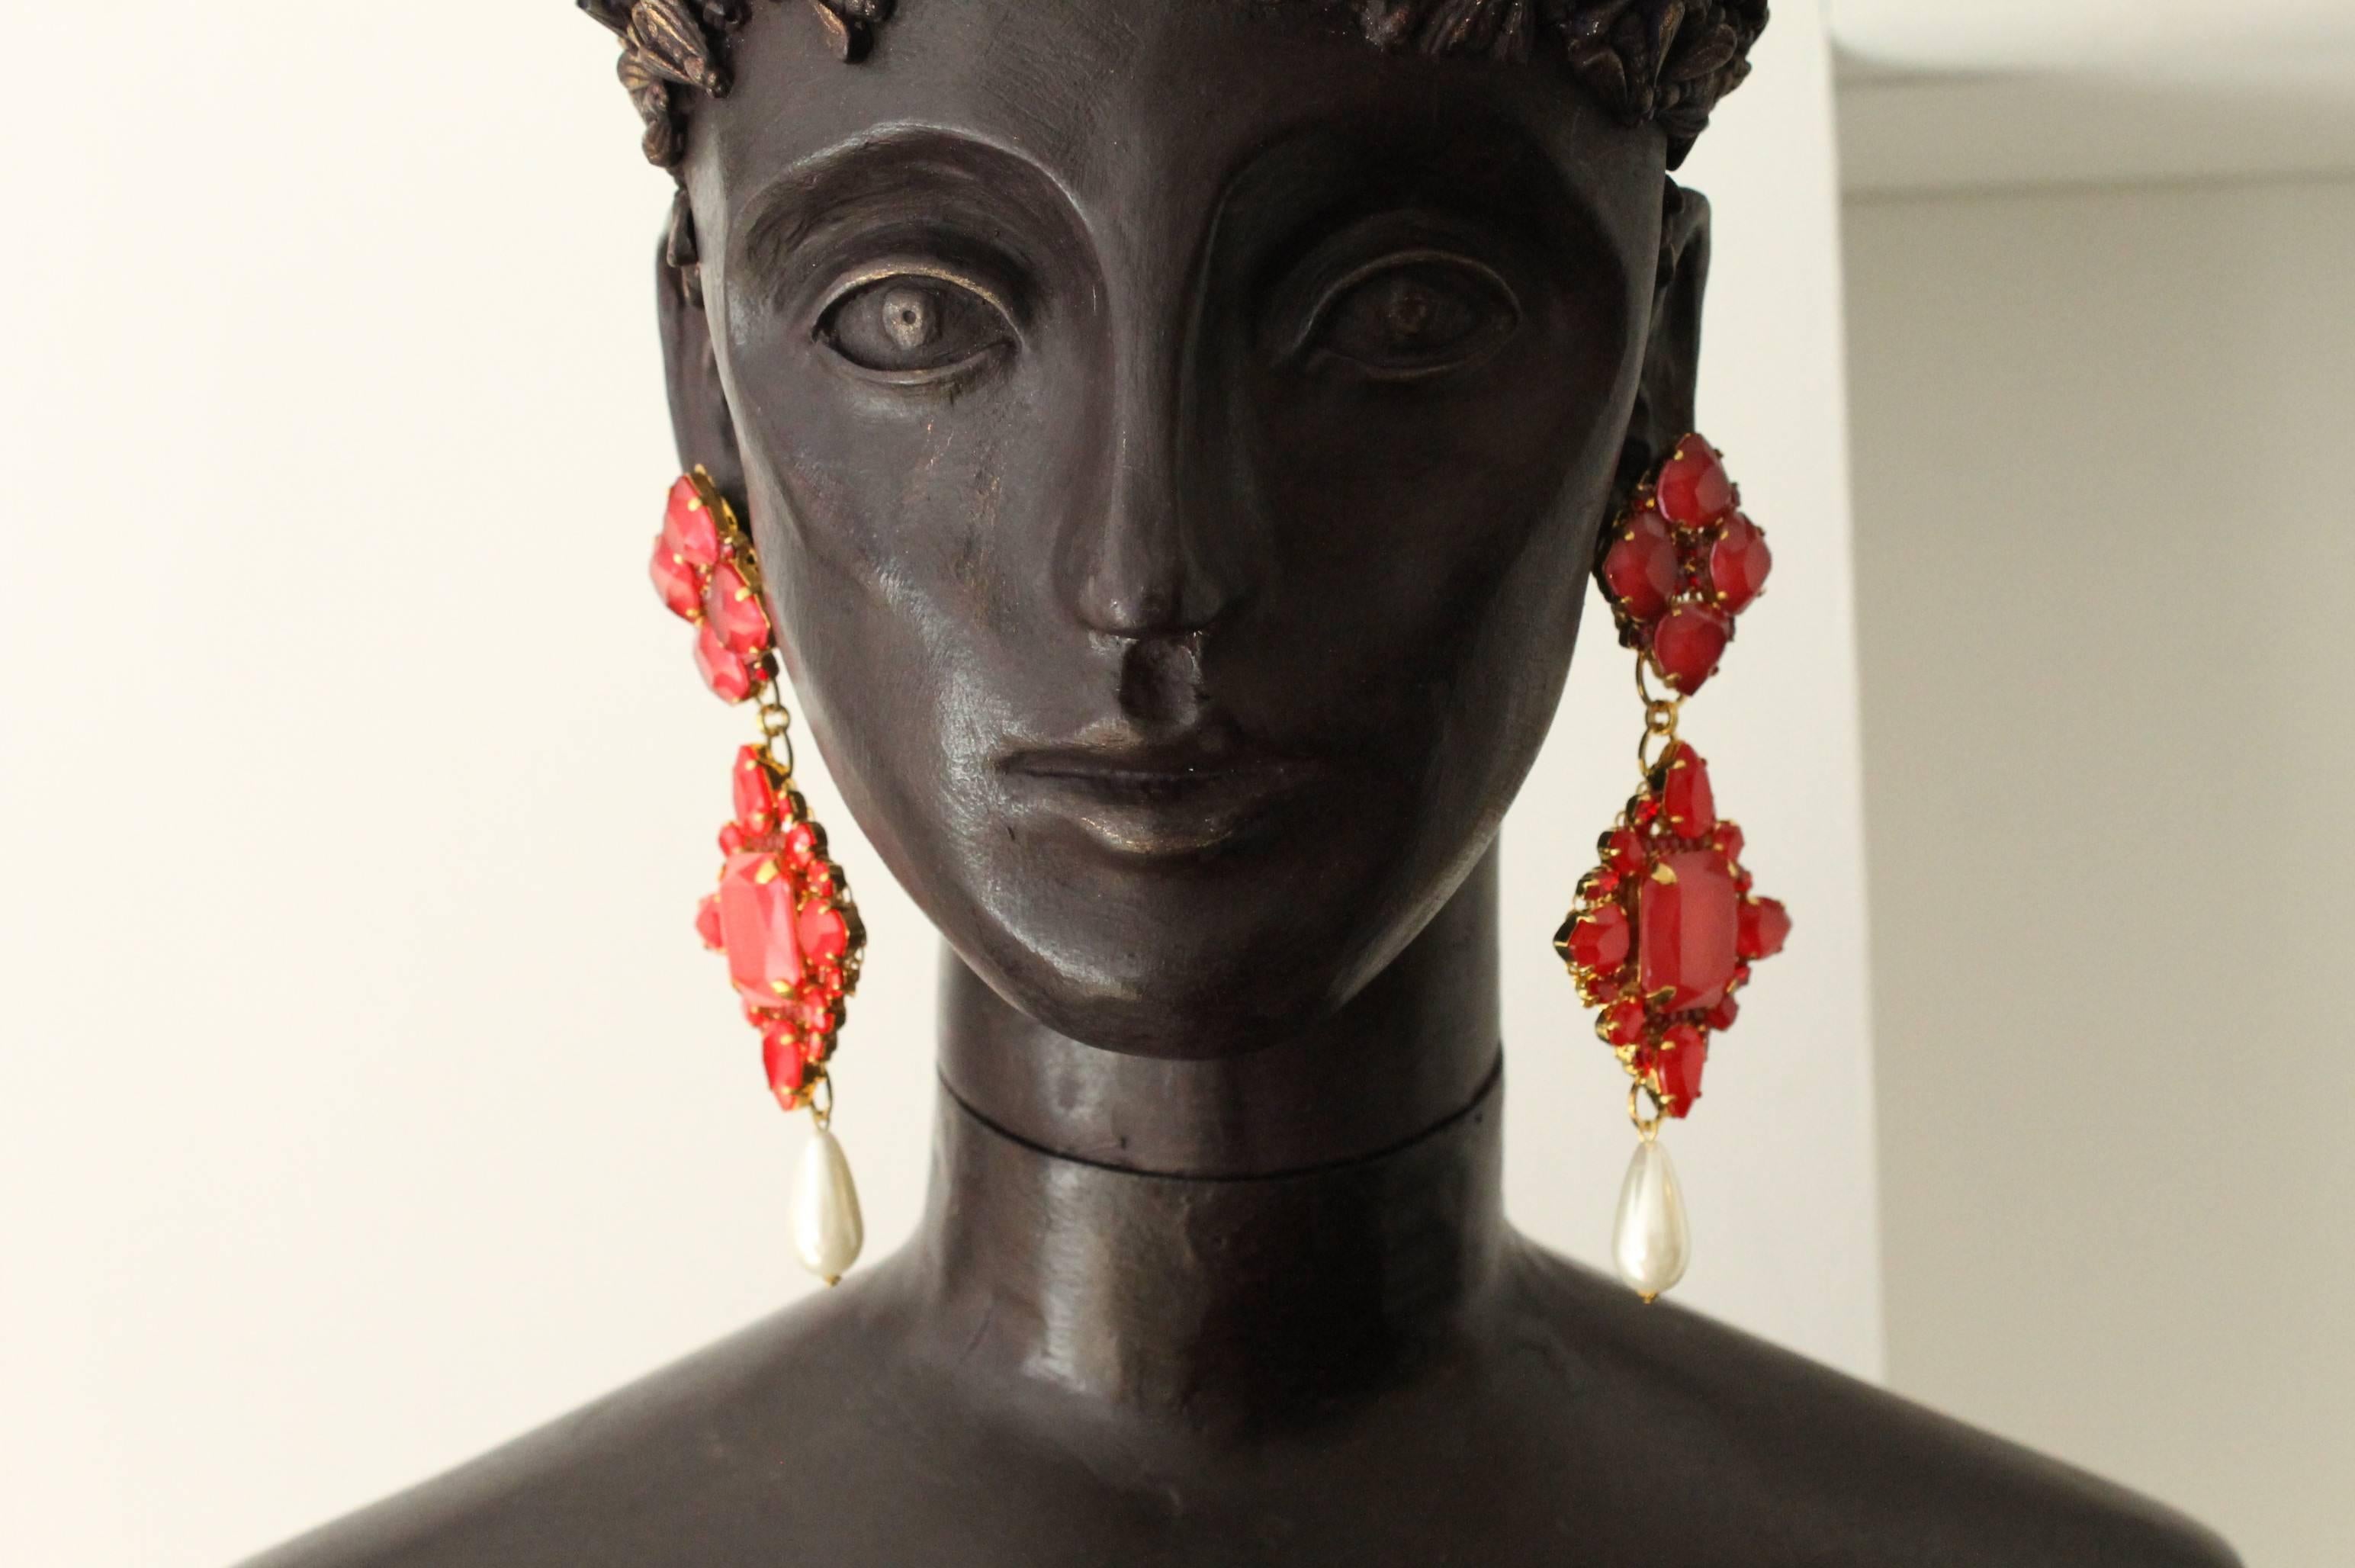 The ultimate statement drop earrings featuring hand-enamelled Swarovski crystals in stunning shades of red, Vicki's latest collaboration with Fashion East alumnus Mimi Wade for her Pink Panther collection.

Handmade for the past 25 years by Vicki’s